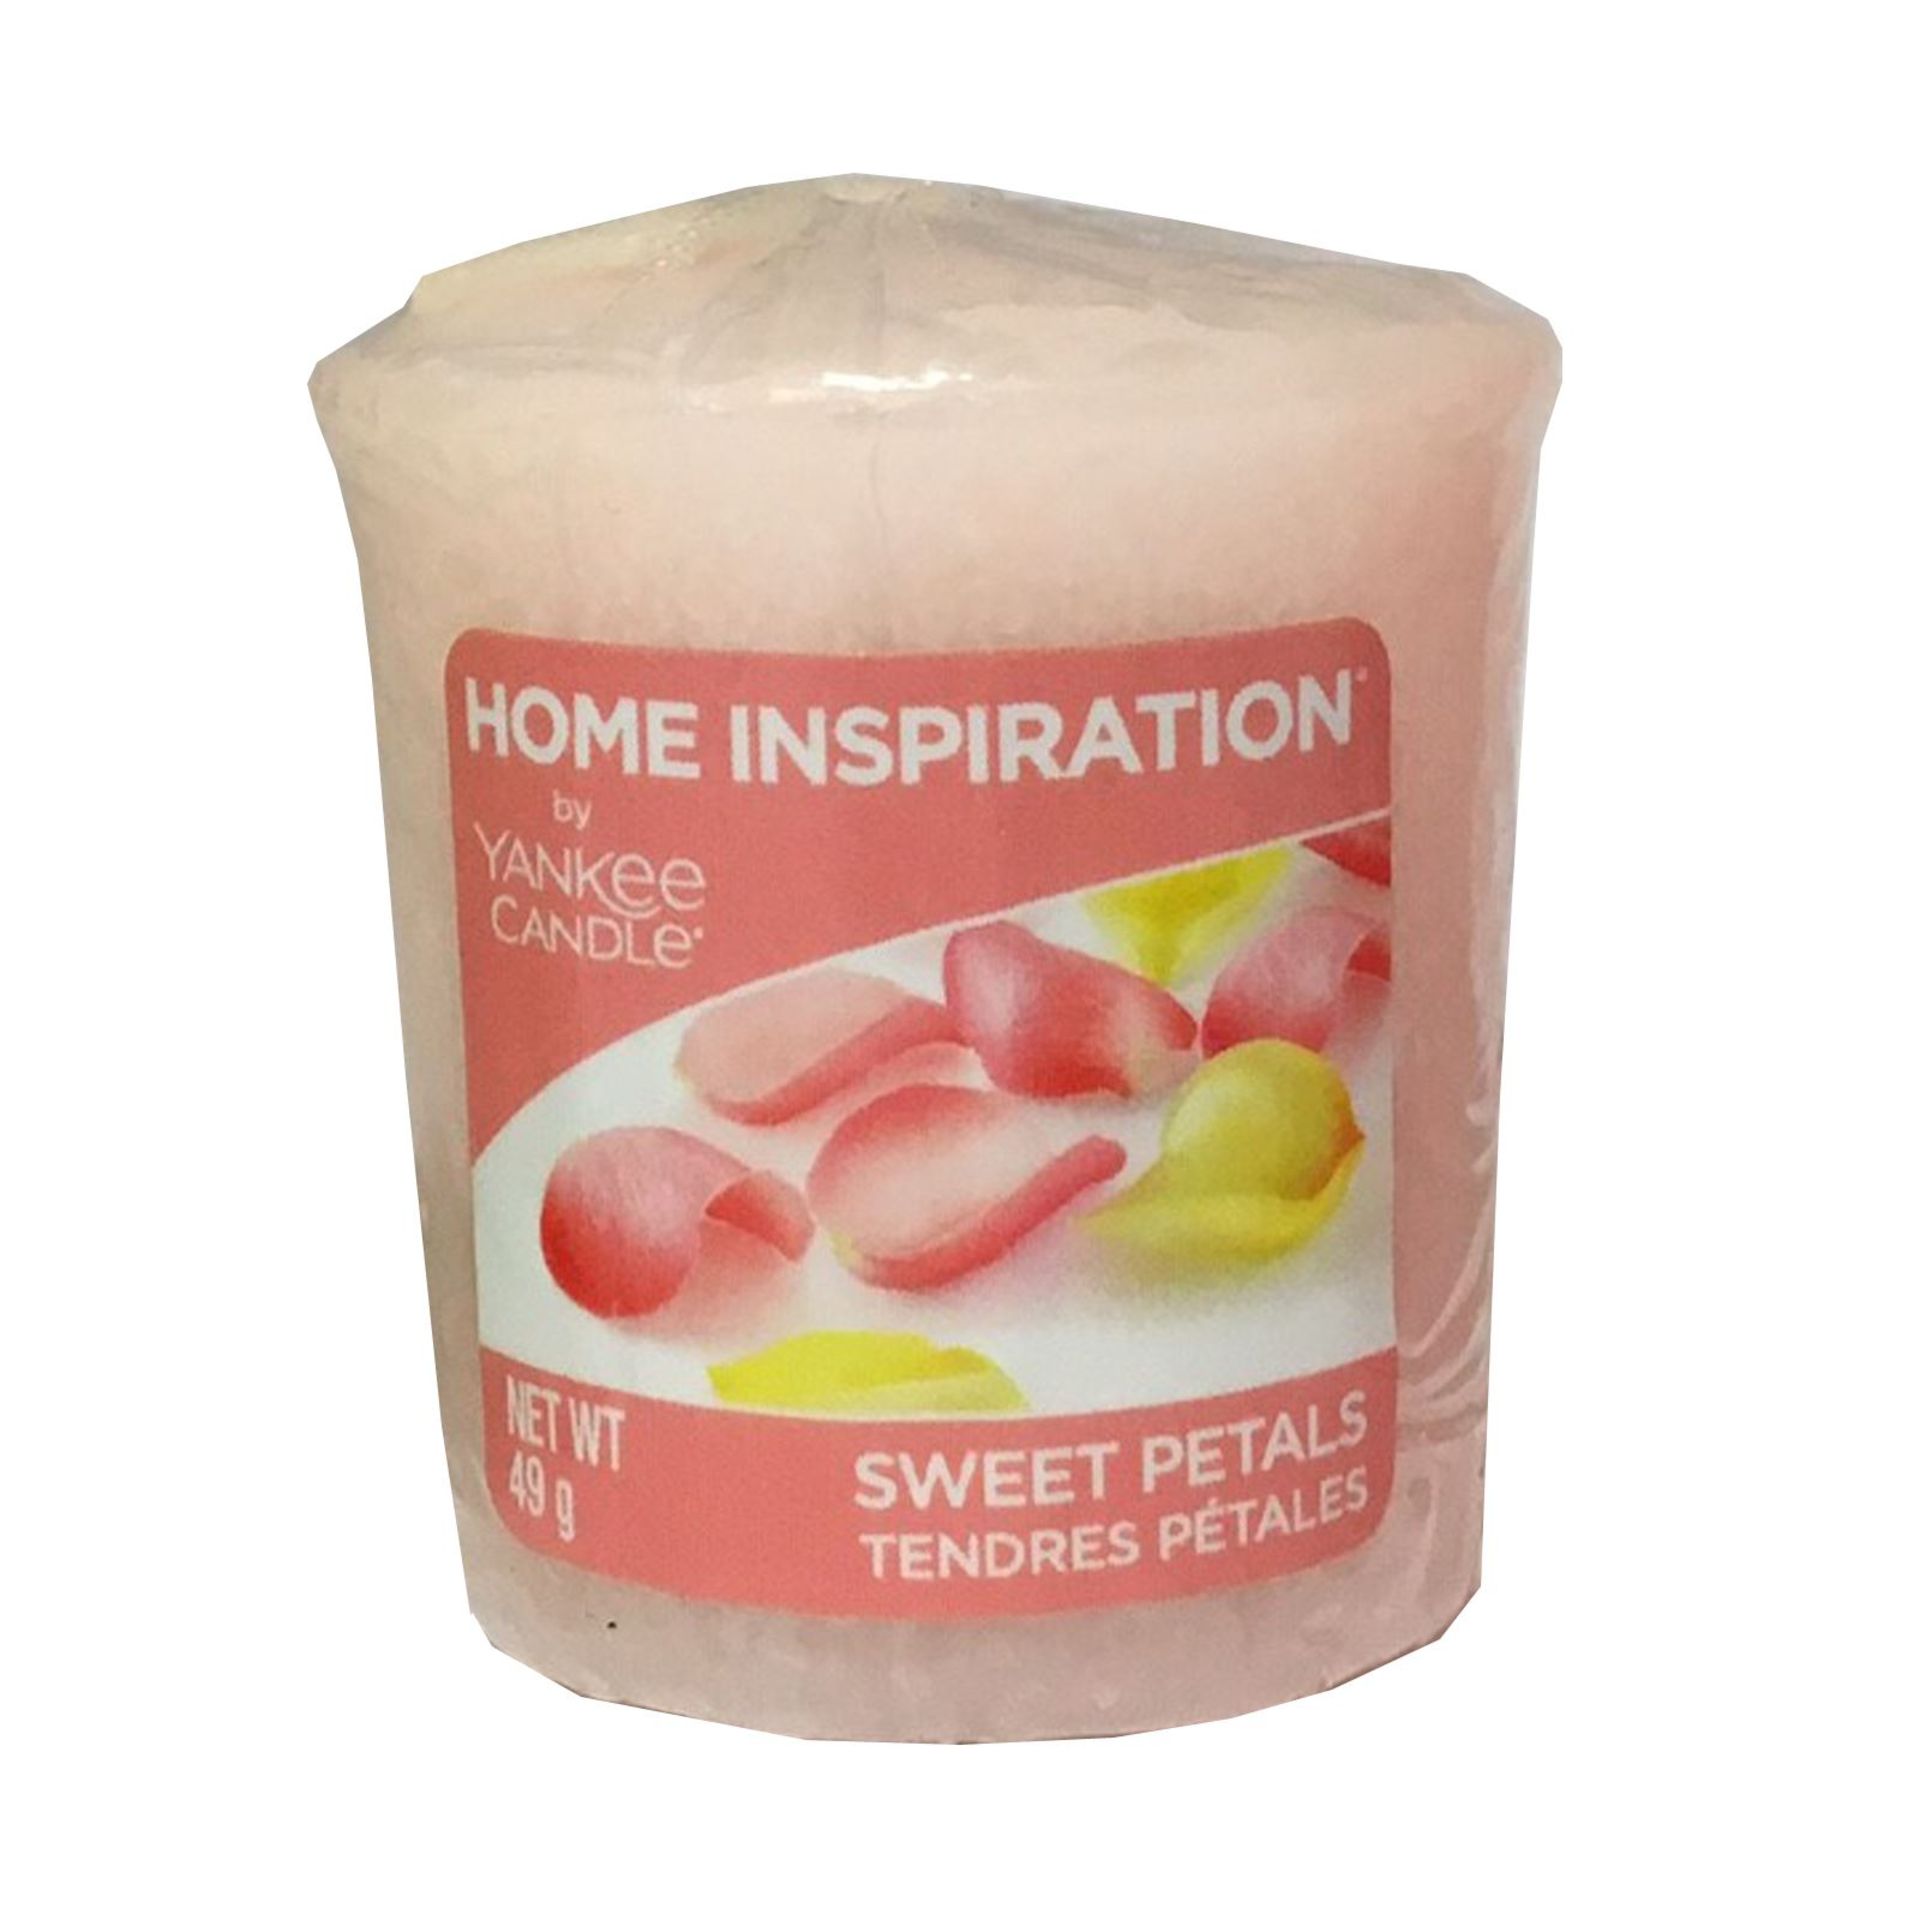 V *TRADE QTY* Brand New 18 X Yankee Candle Votive Sweet Petals - eBay Price £107.82 X 5 YOUR BID - Image 2 of 2